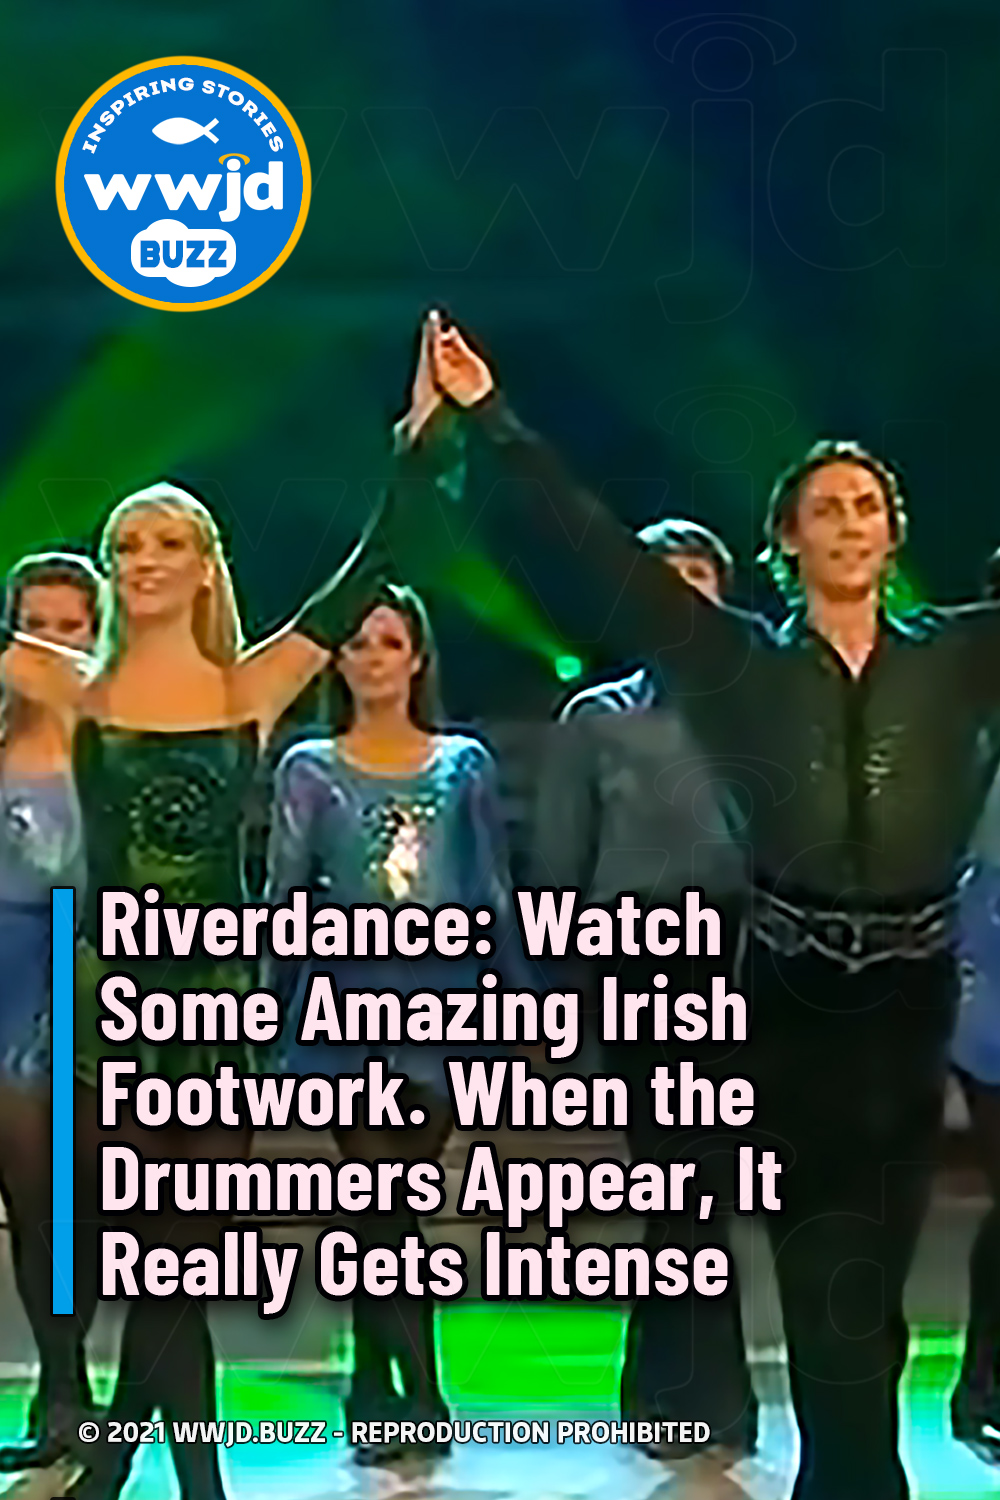 Riverdance: Watch Some Amazing Irish Footwork. When the Drummers Appear, It Really Gets Intense